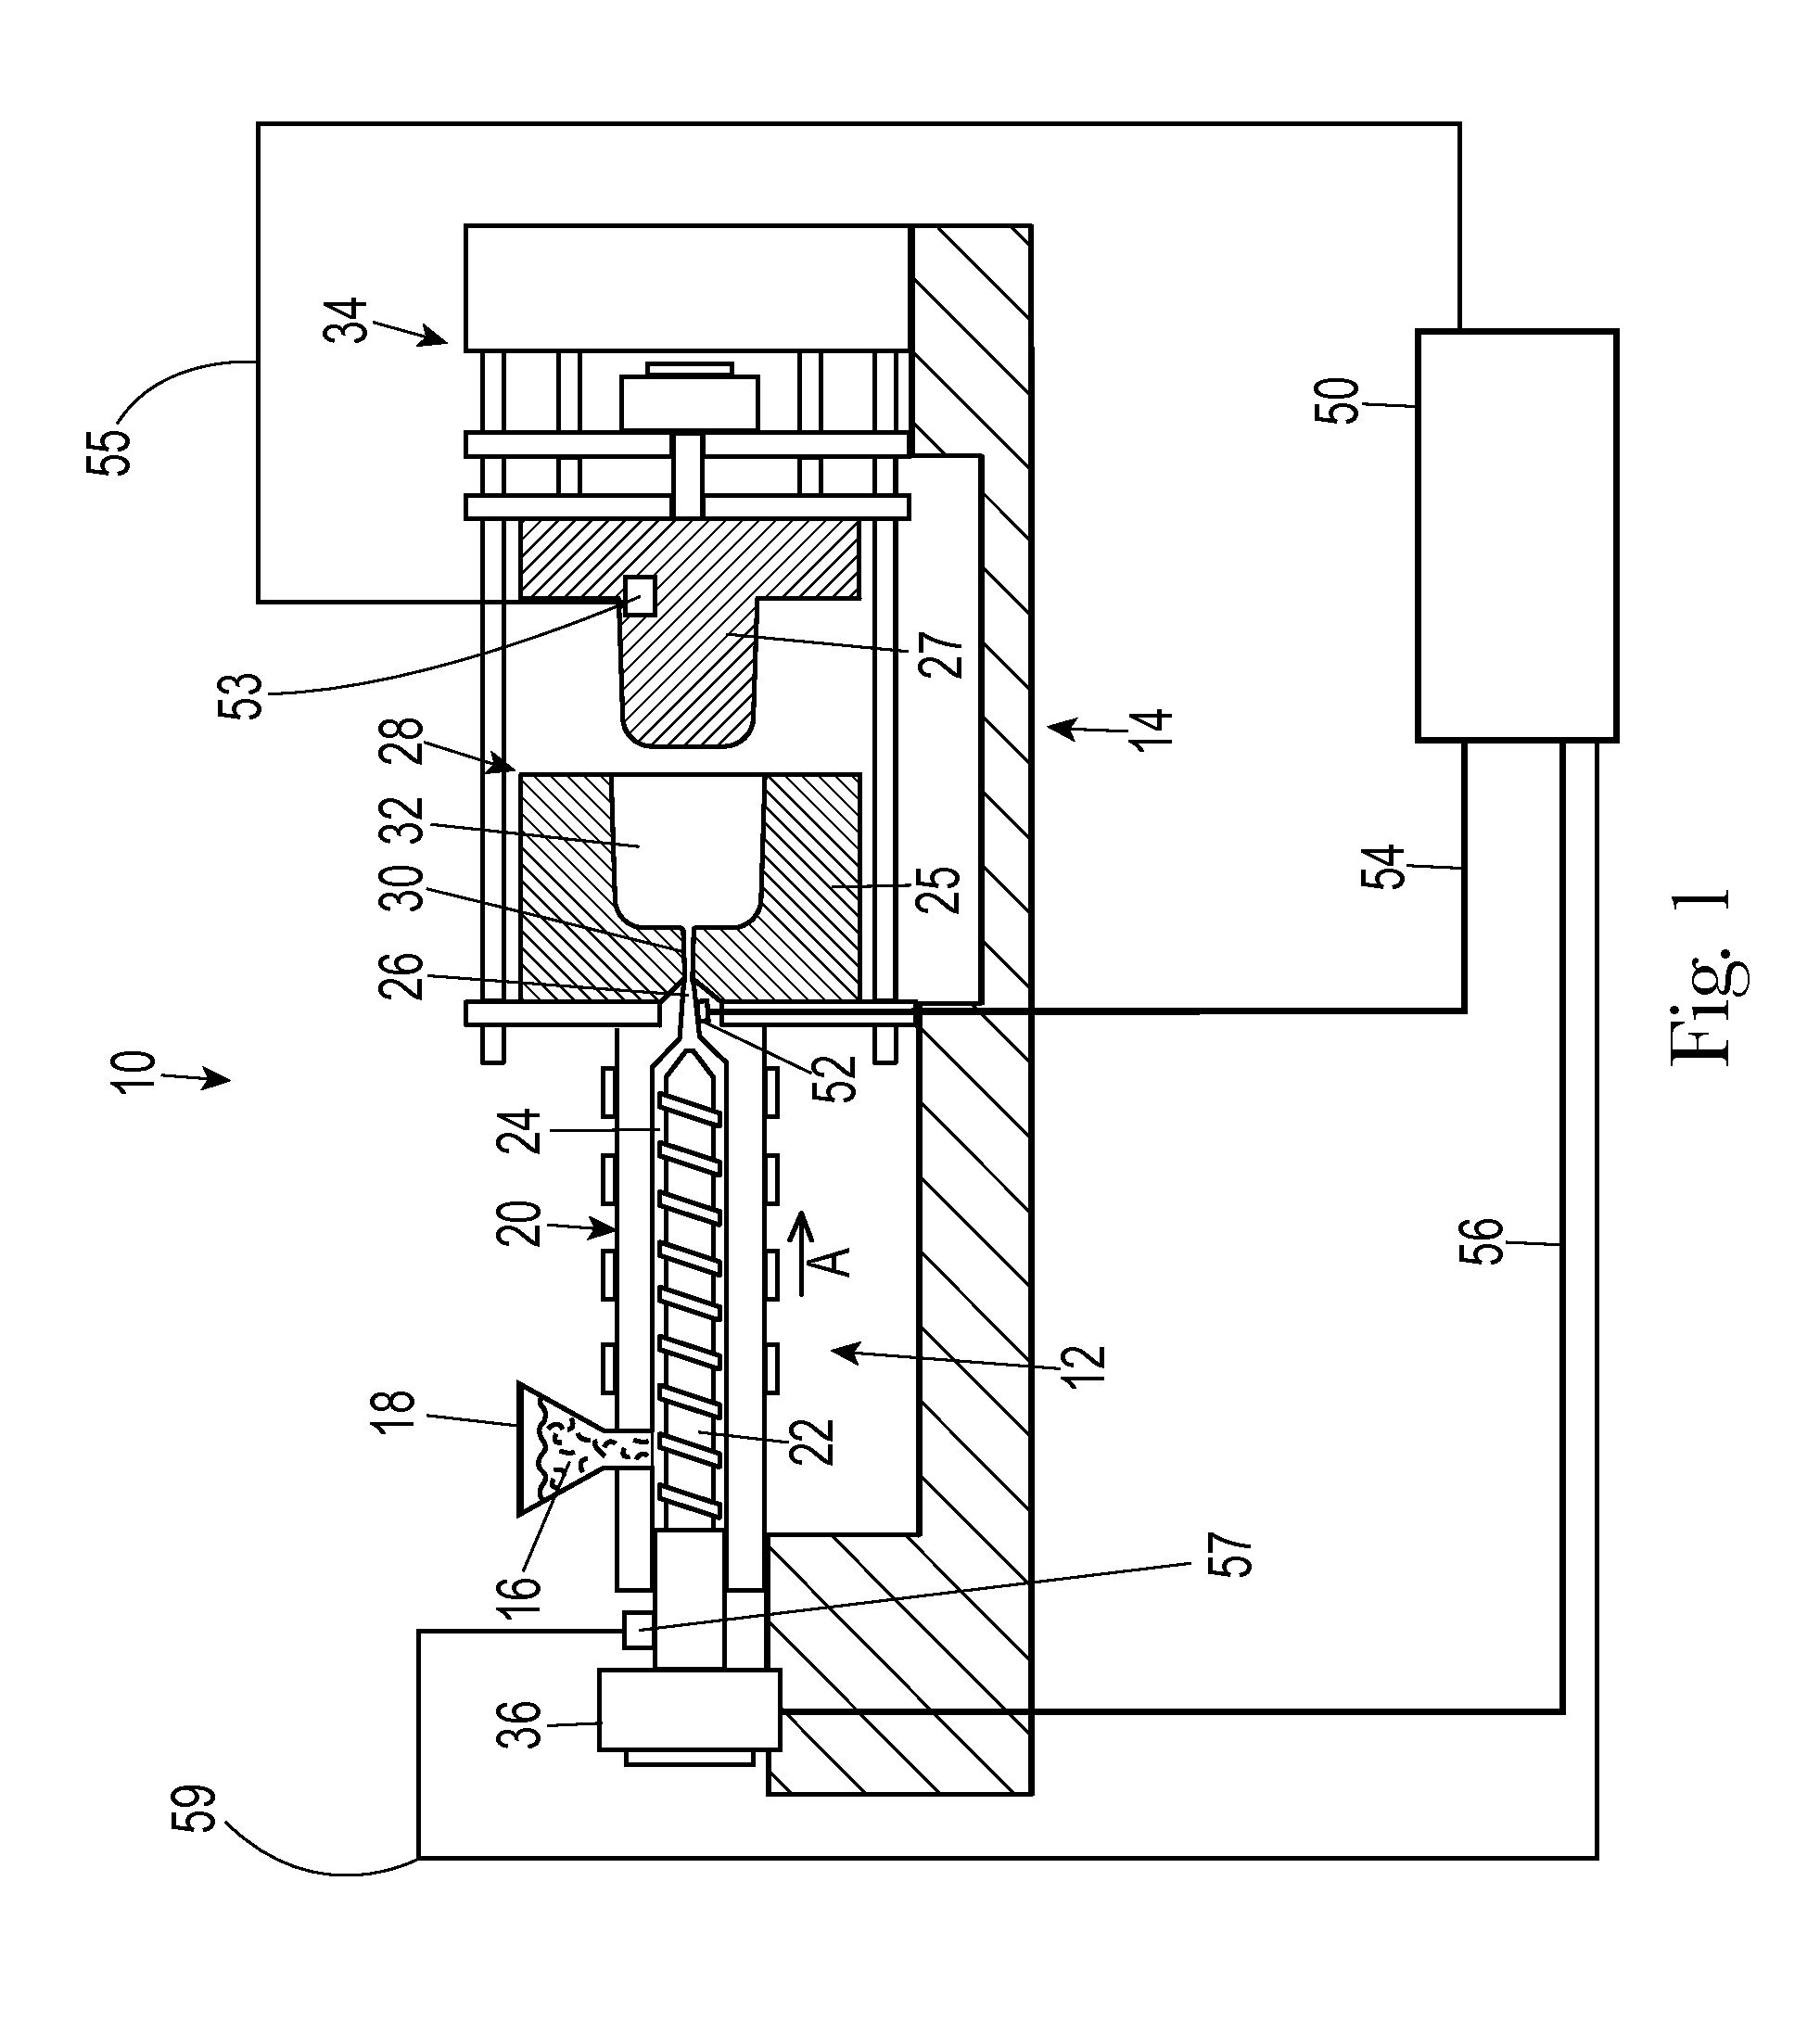 Injection Molding Machines and Methods for Accounting for Changes in Material Properties During Injection Molding Runs